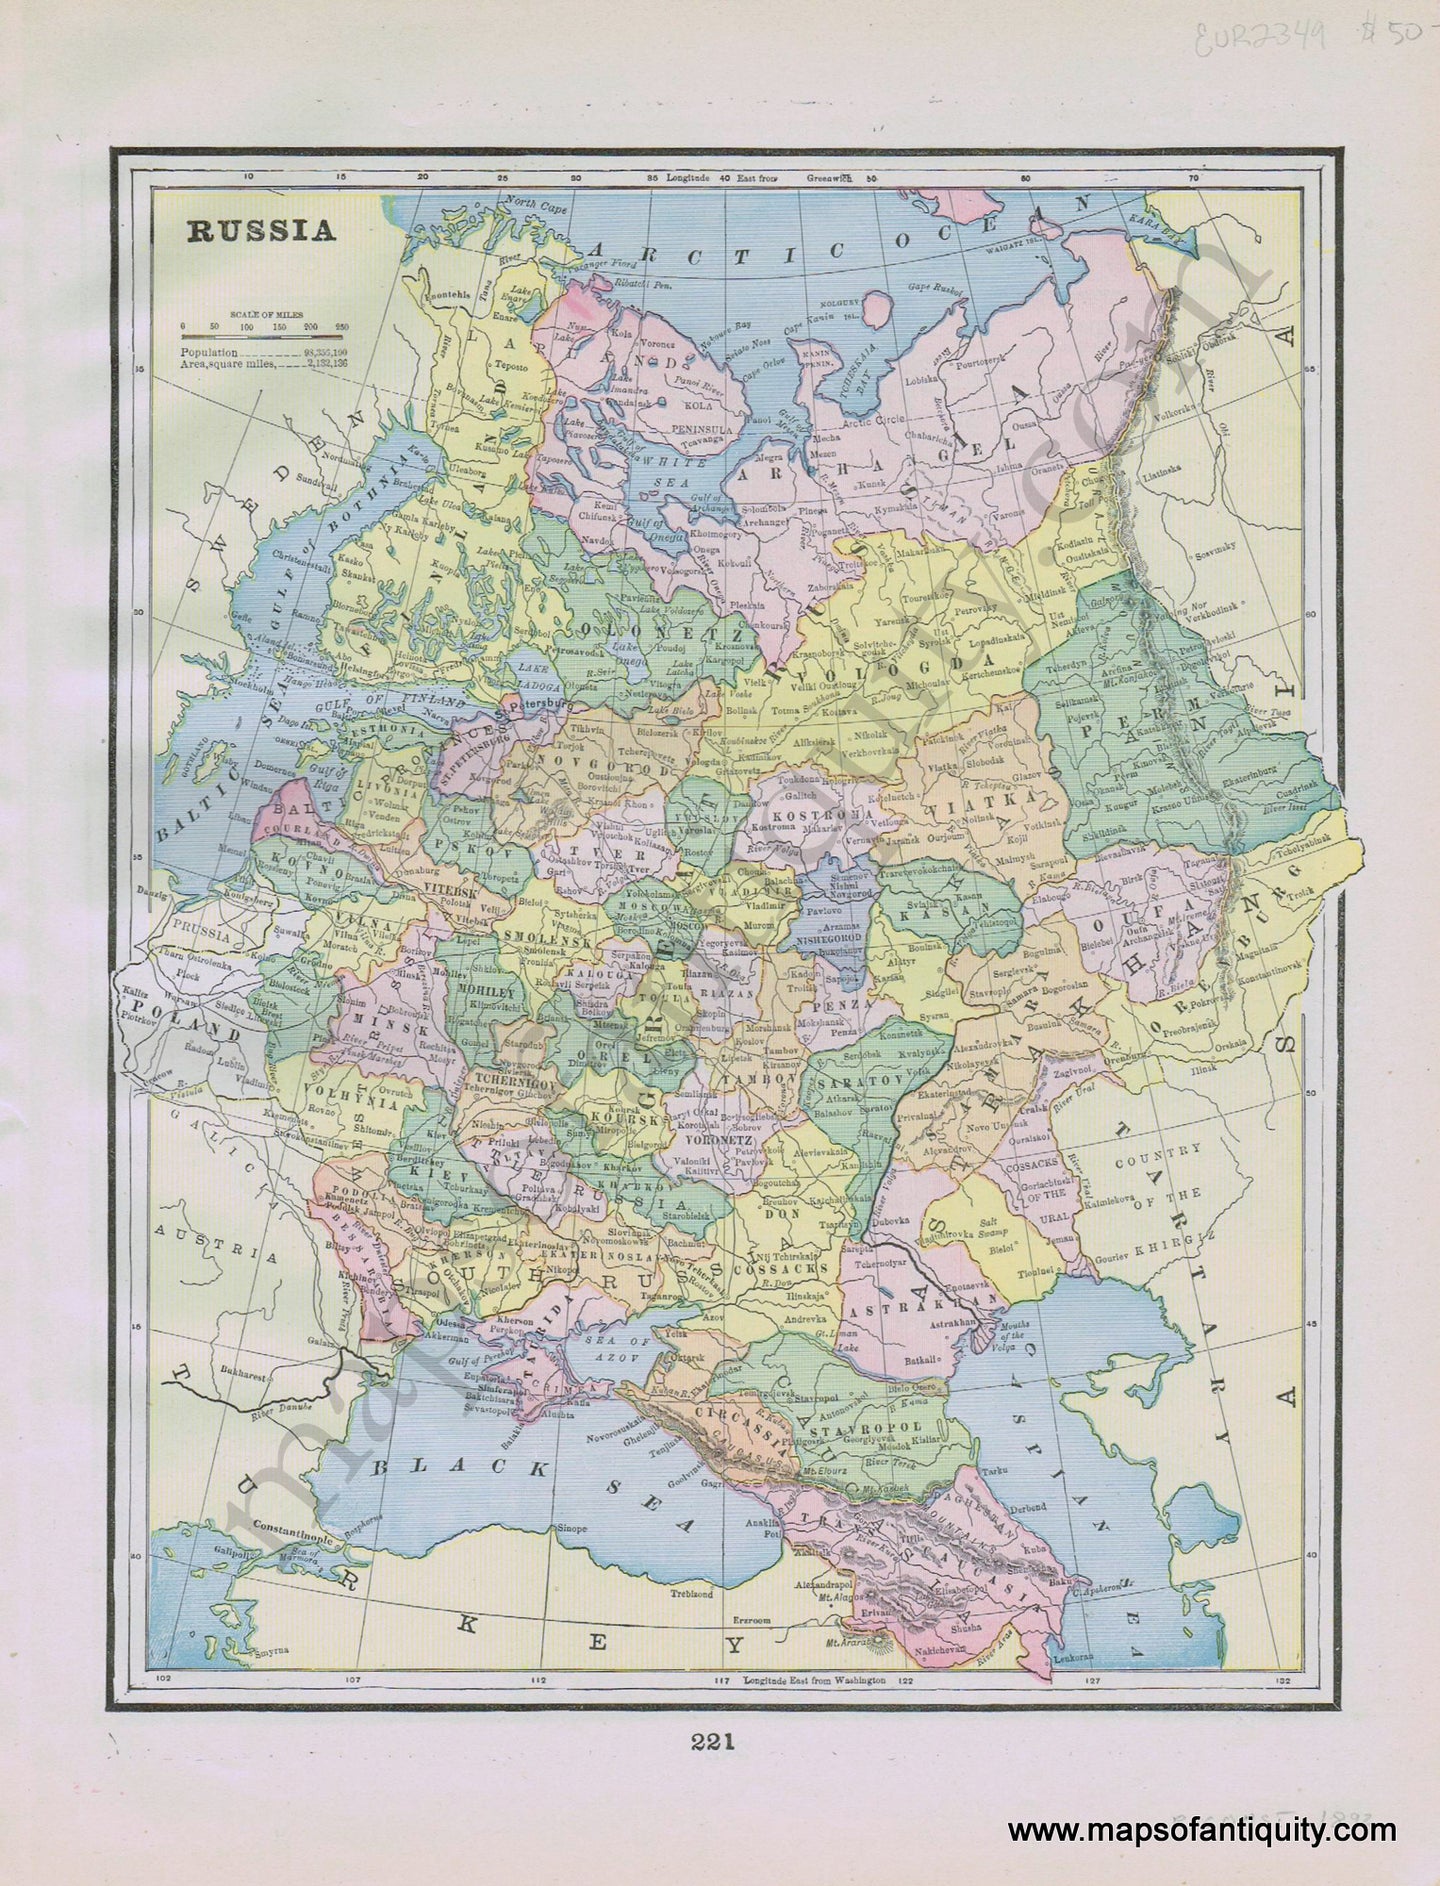 Antique-Printed-Color-Map-Russia-verso:-Principal-Cities-of-the-Old-World-Europe-Russia-in-Europe-1892-Home-Library-&-Supply-Association-Maps-Of-Antiquity